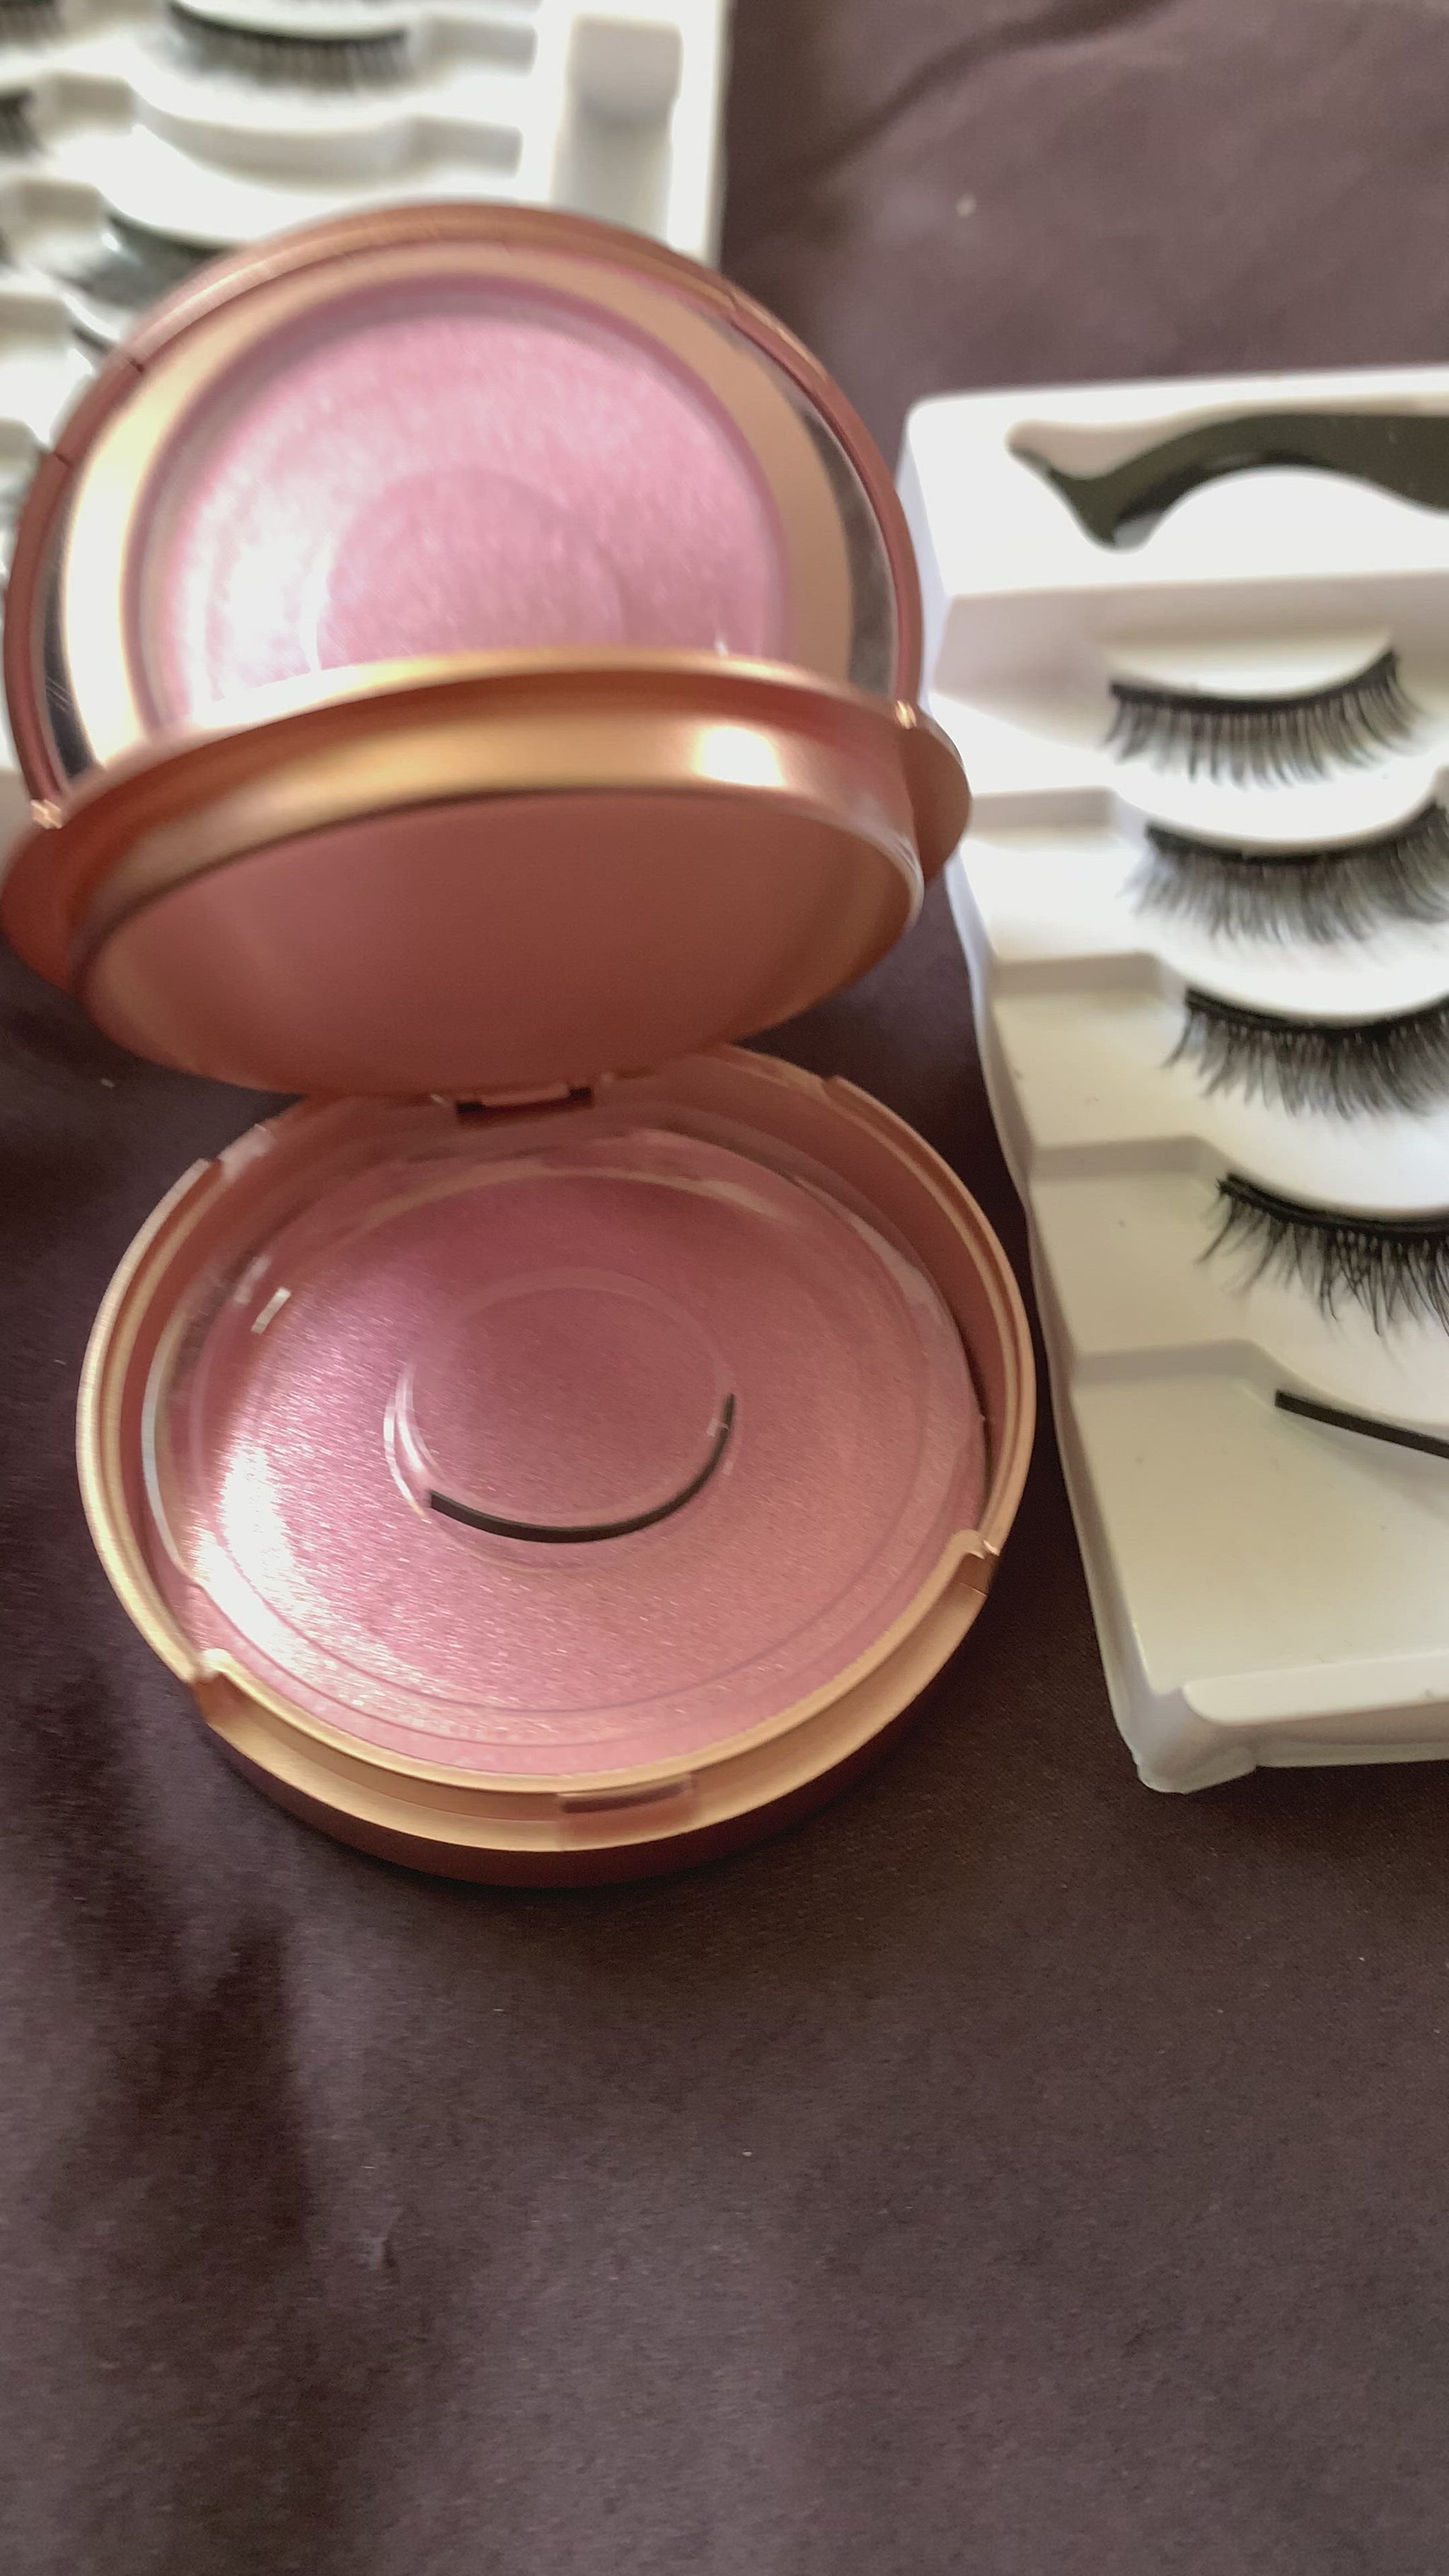 How to add lashes to a new compact mirror